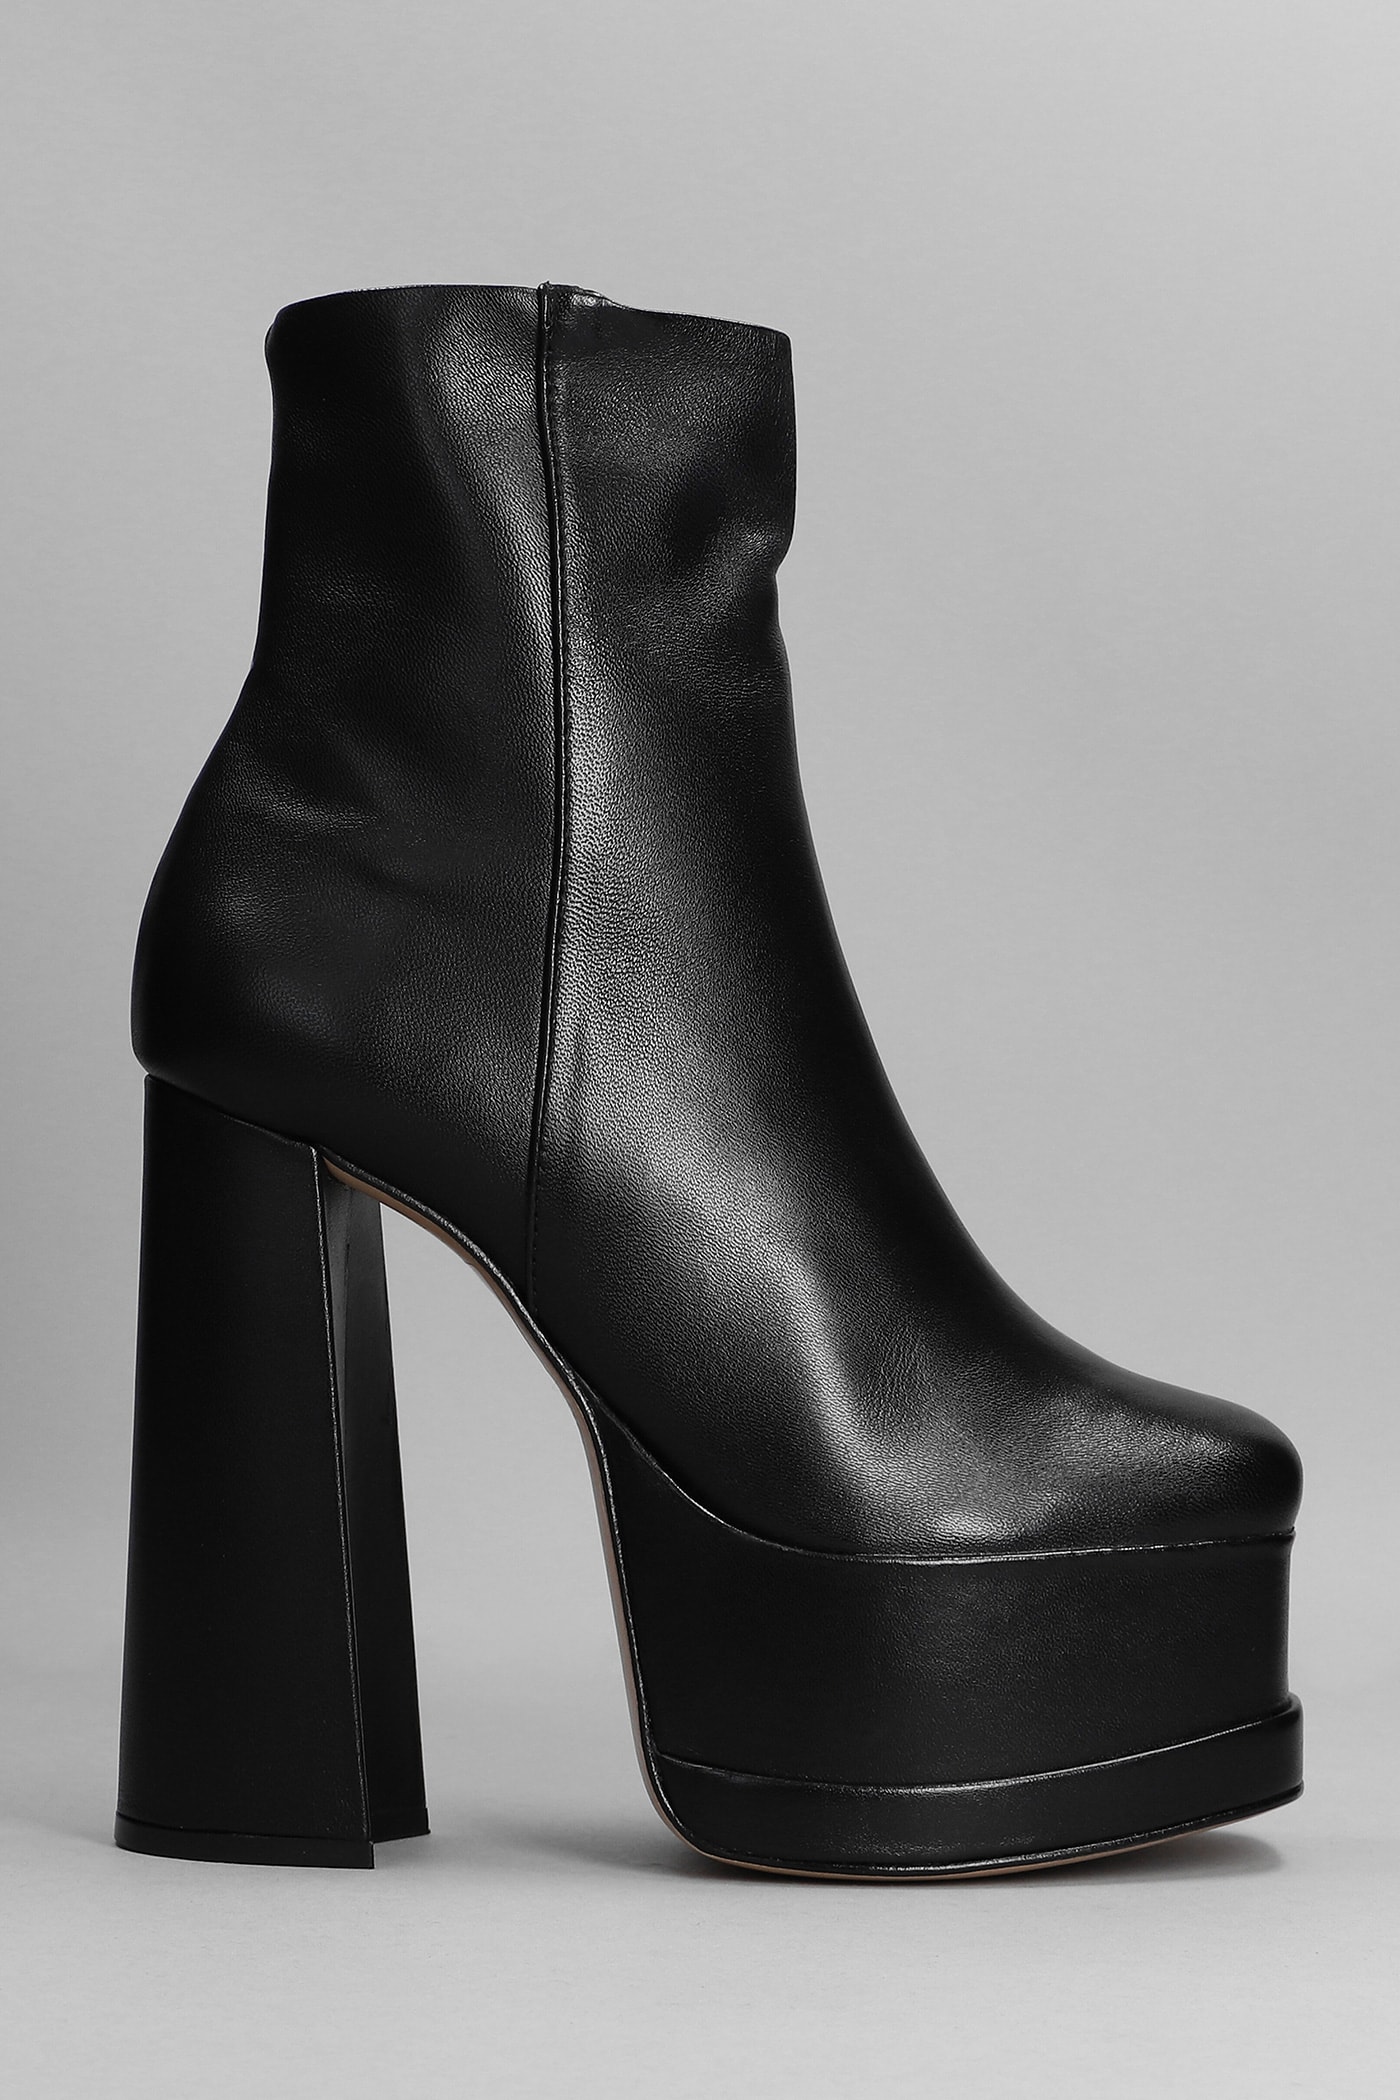 Schutz Selene Casual High Heels Ankle Boots In Black Leather